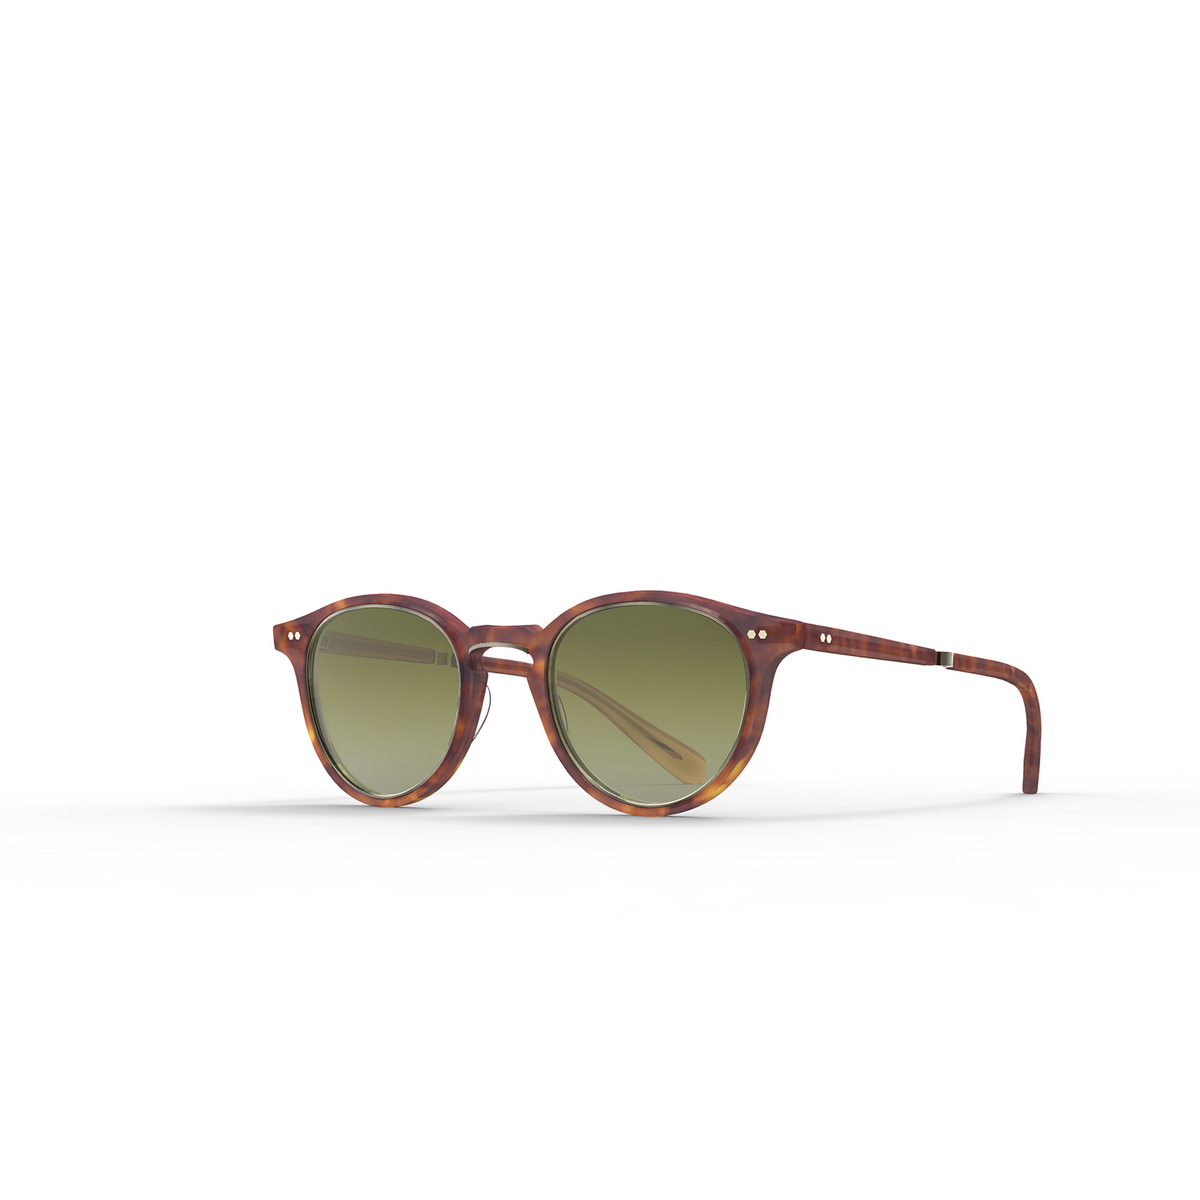 Mr. Leight® Round Sunglasses: Marmont Ii S color Cacao Tortoise-antique Gold/elm Cact-atg/elm - three-quarters view.